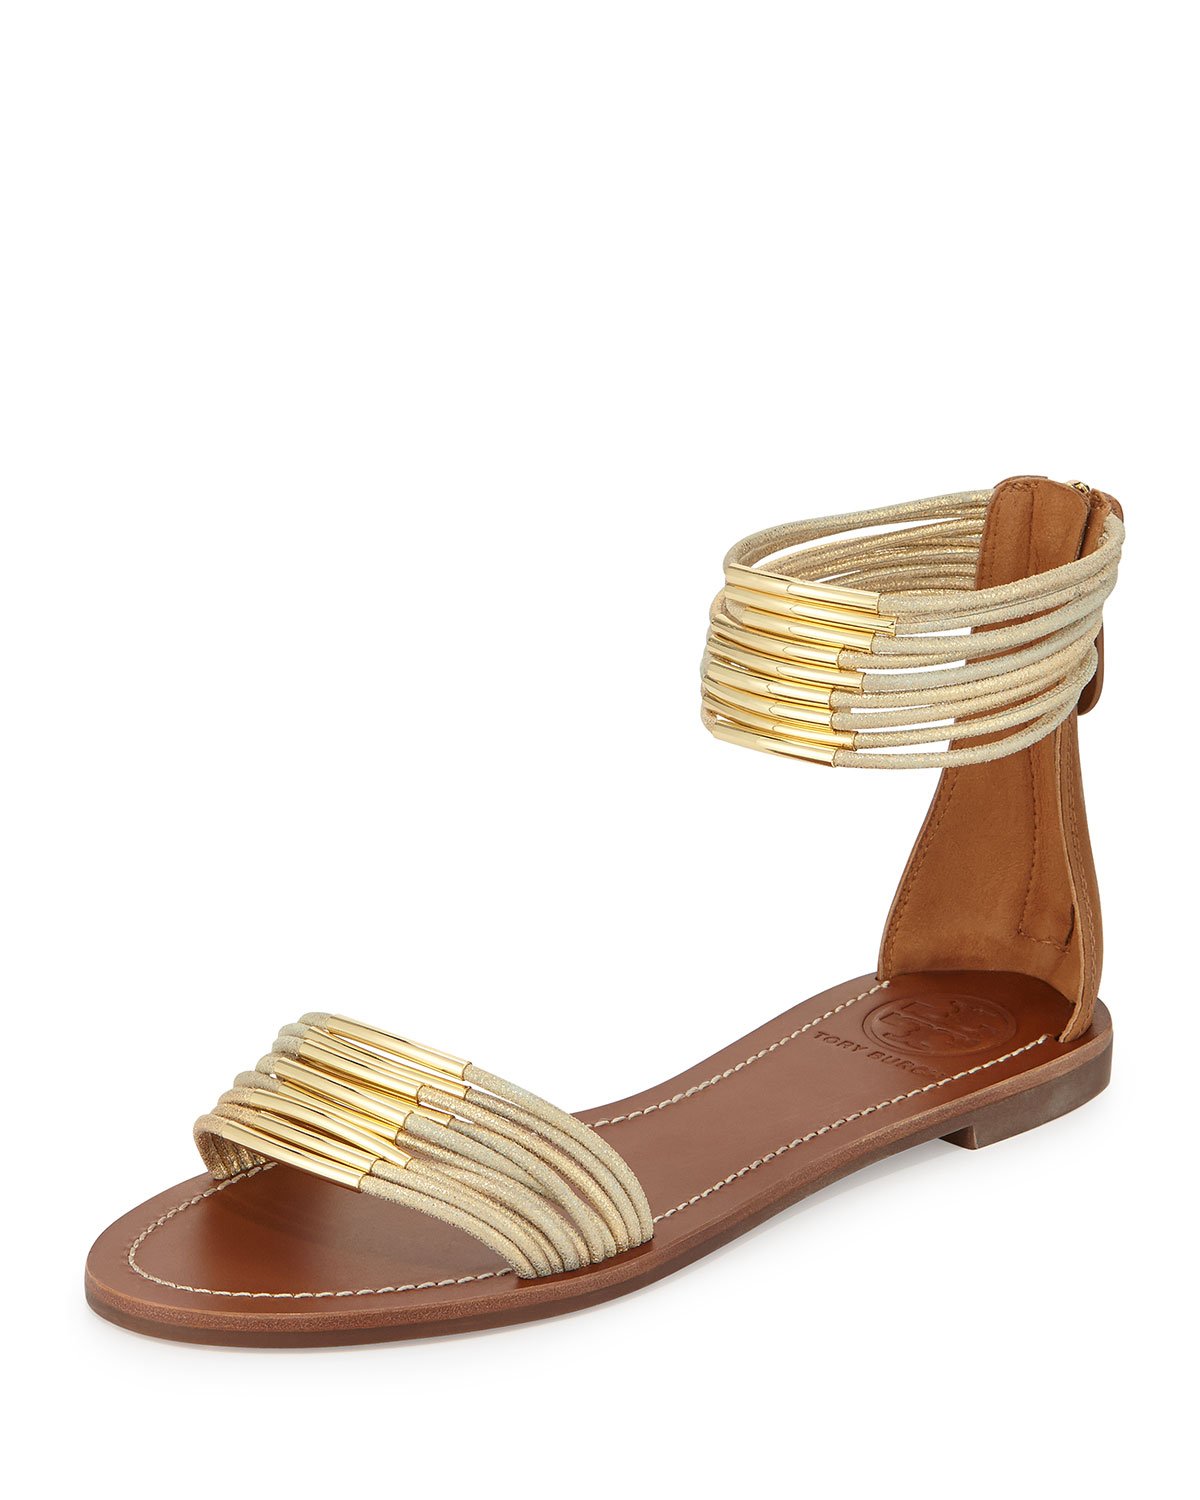 Tory Burch Mignon Rings Strappy Flat Ankle-Wrap Sandal in Gold | Lyst